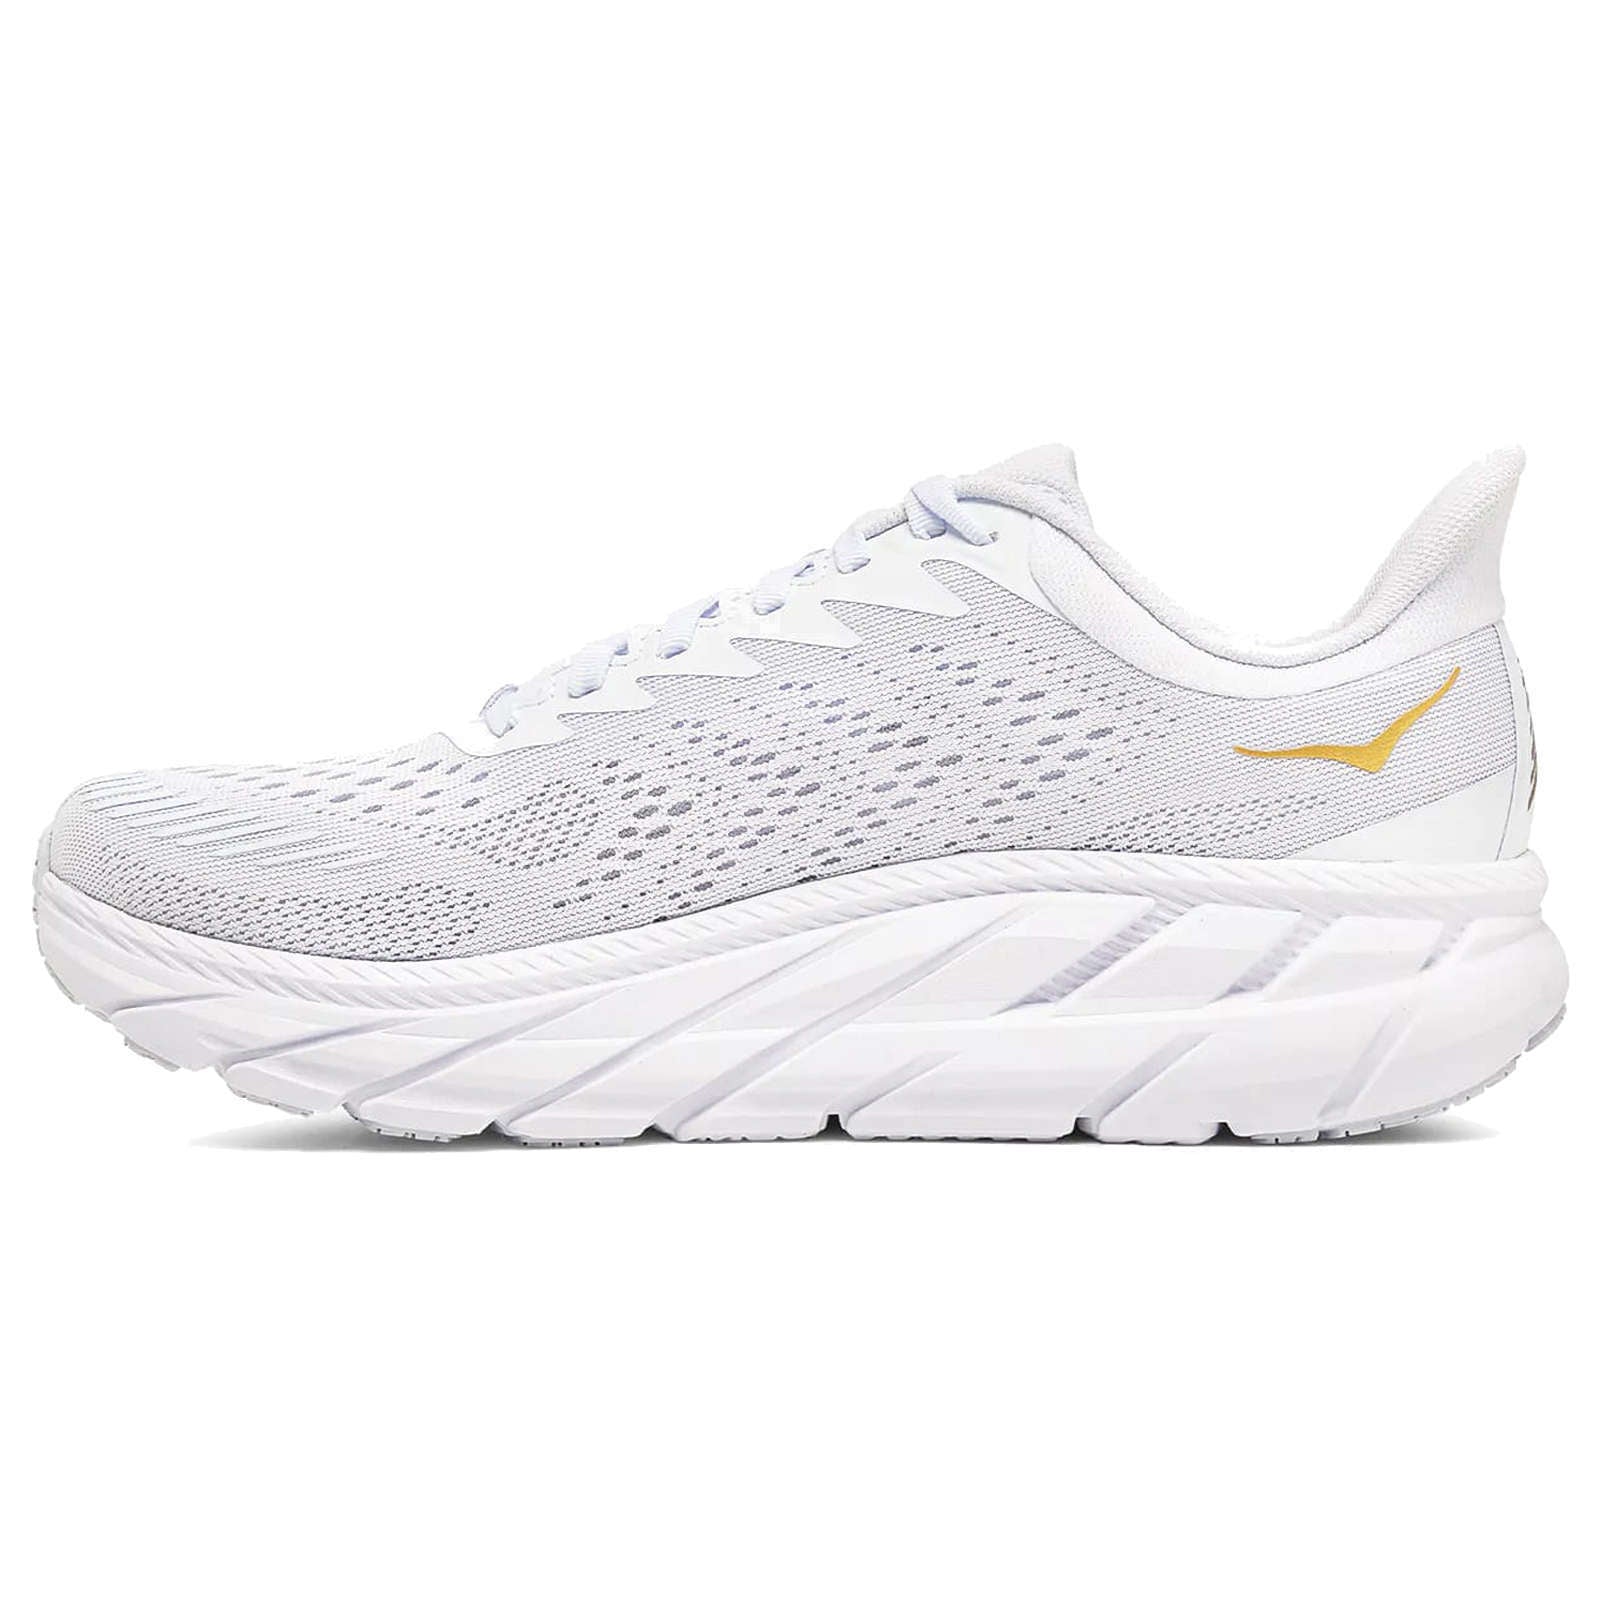 Hoka One One Clifton 7 Mesh Men's Low-Top Road Running Trainers#color_white golden egg